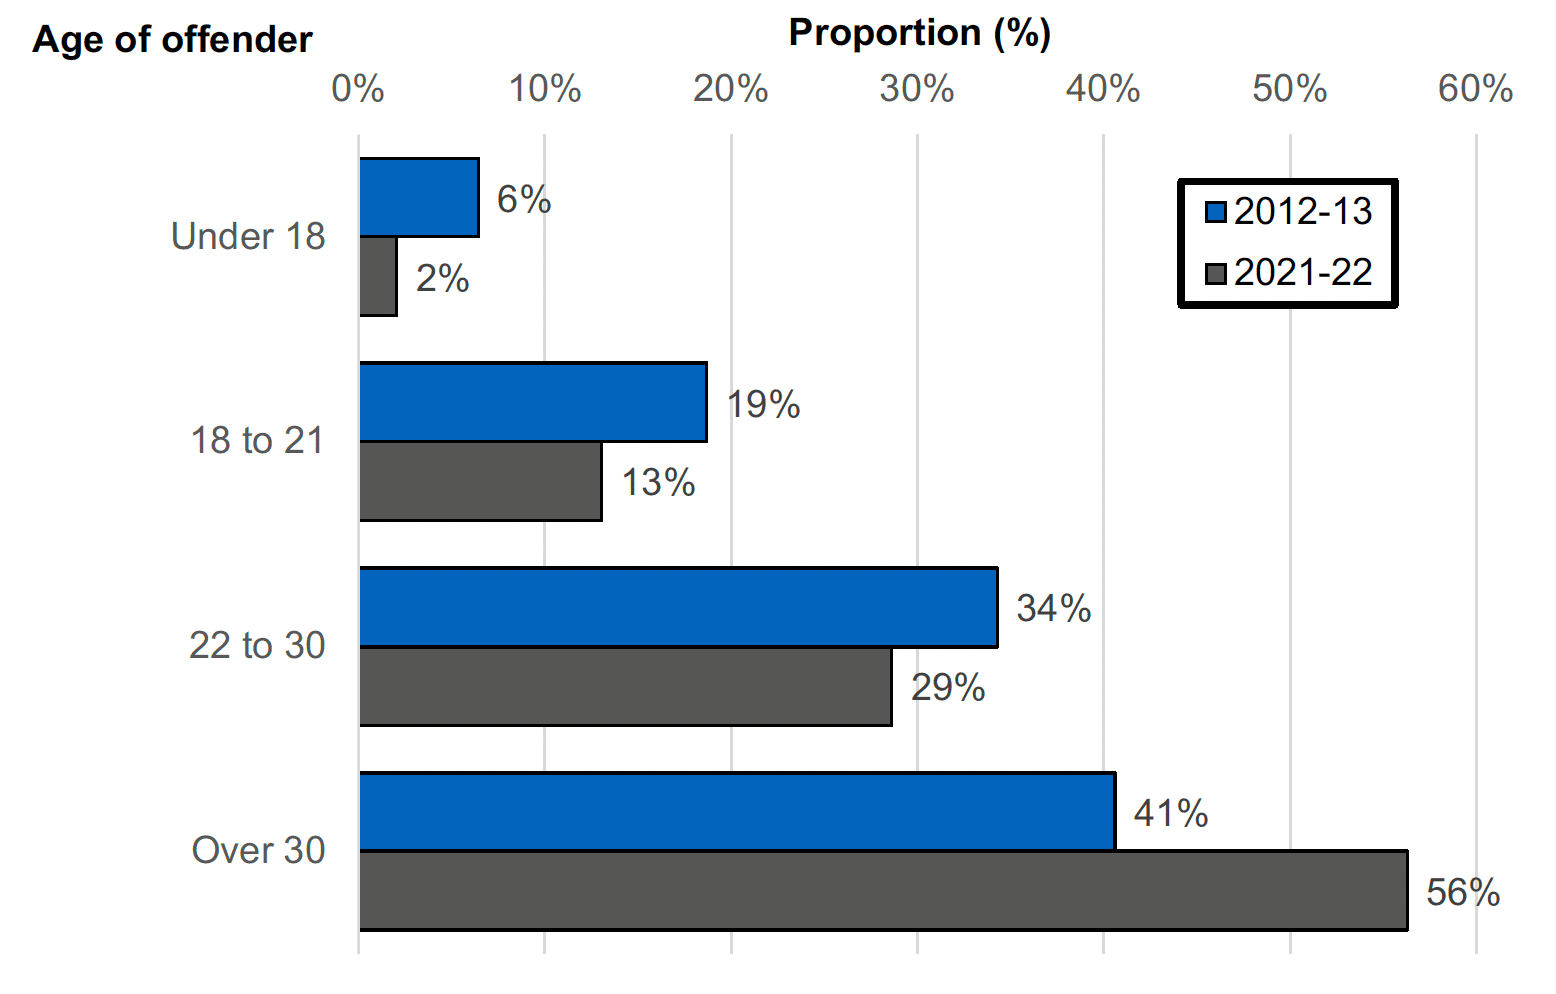 Stacked bar chart showing the proportion of weapons possession by age group, showing the differences between the two years of 2012-13 and 2021-22. The proportion of convictions for Weapons possession has fallen in all age groups 30 and under, and increased for those over 30 between 2012-13 and 2021-22.